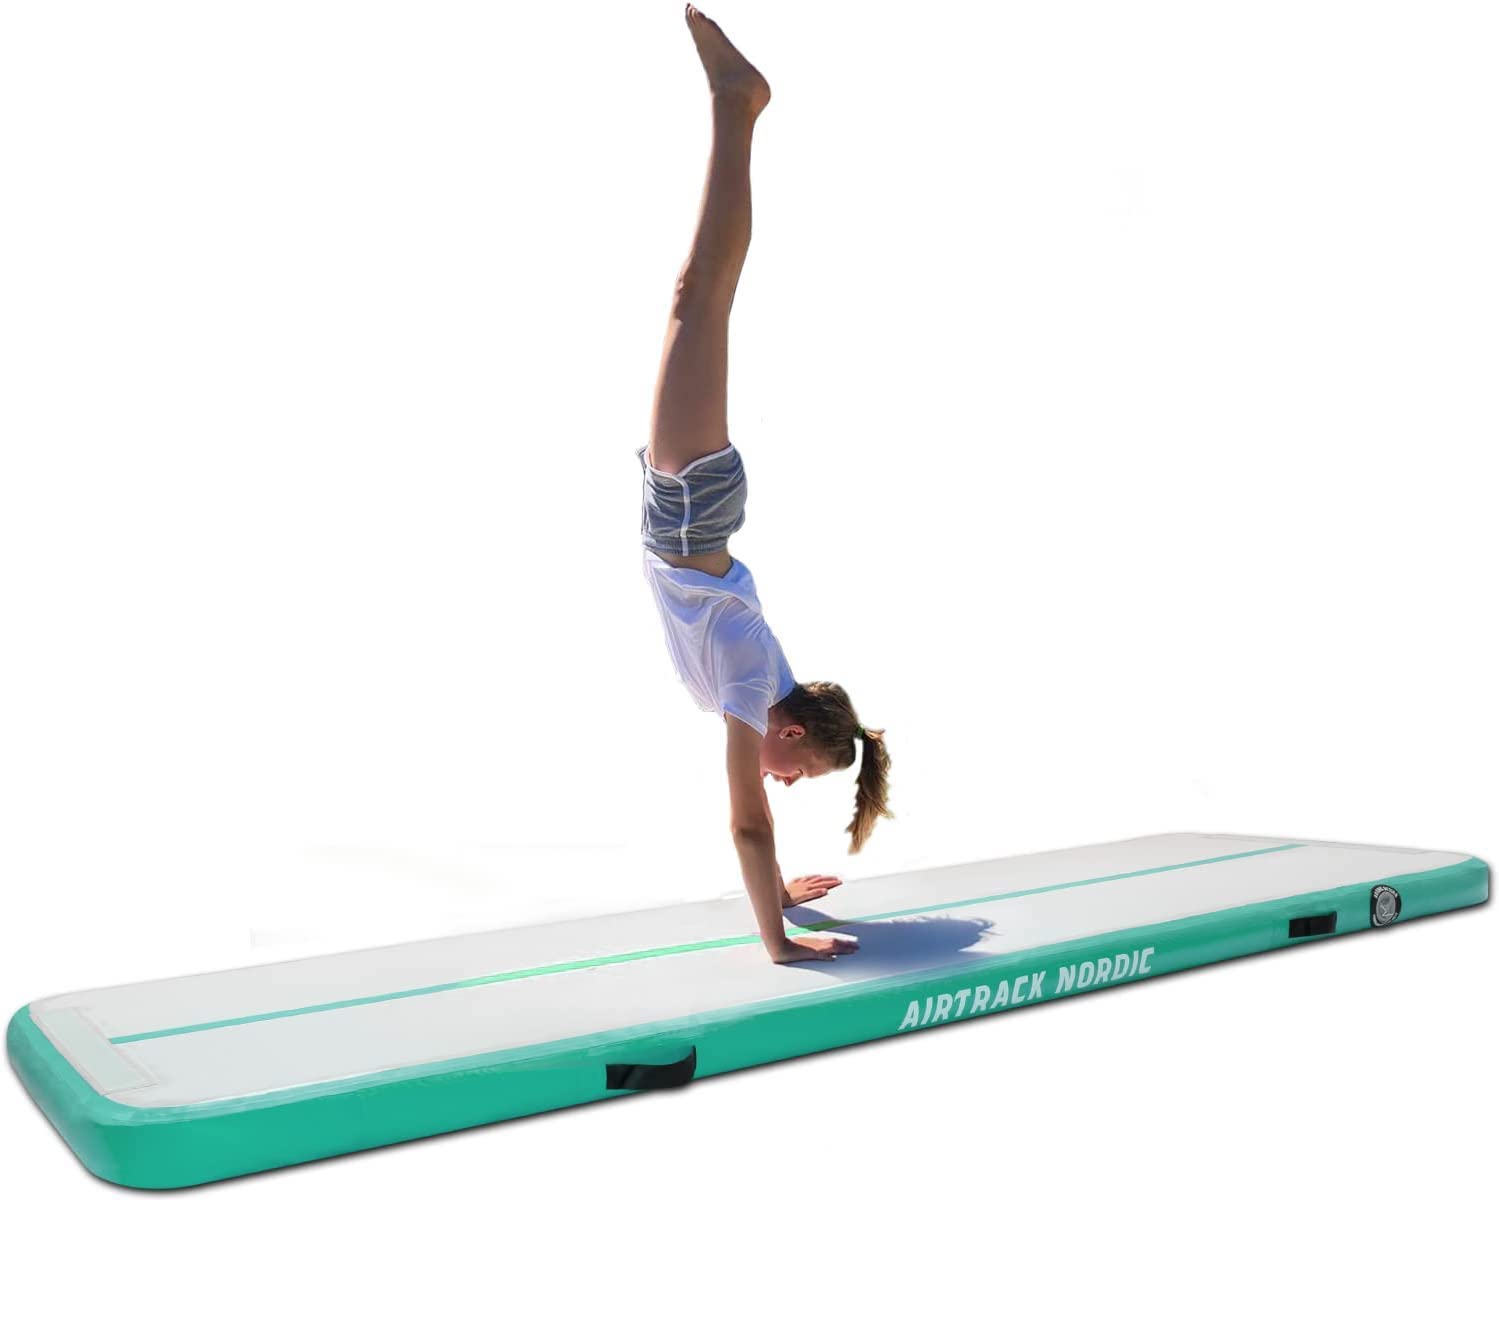 Best airtrack for gymnastics at home- Airtrack Nordic Standard Air Track